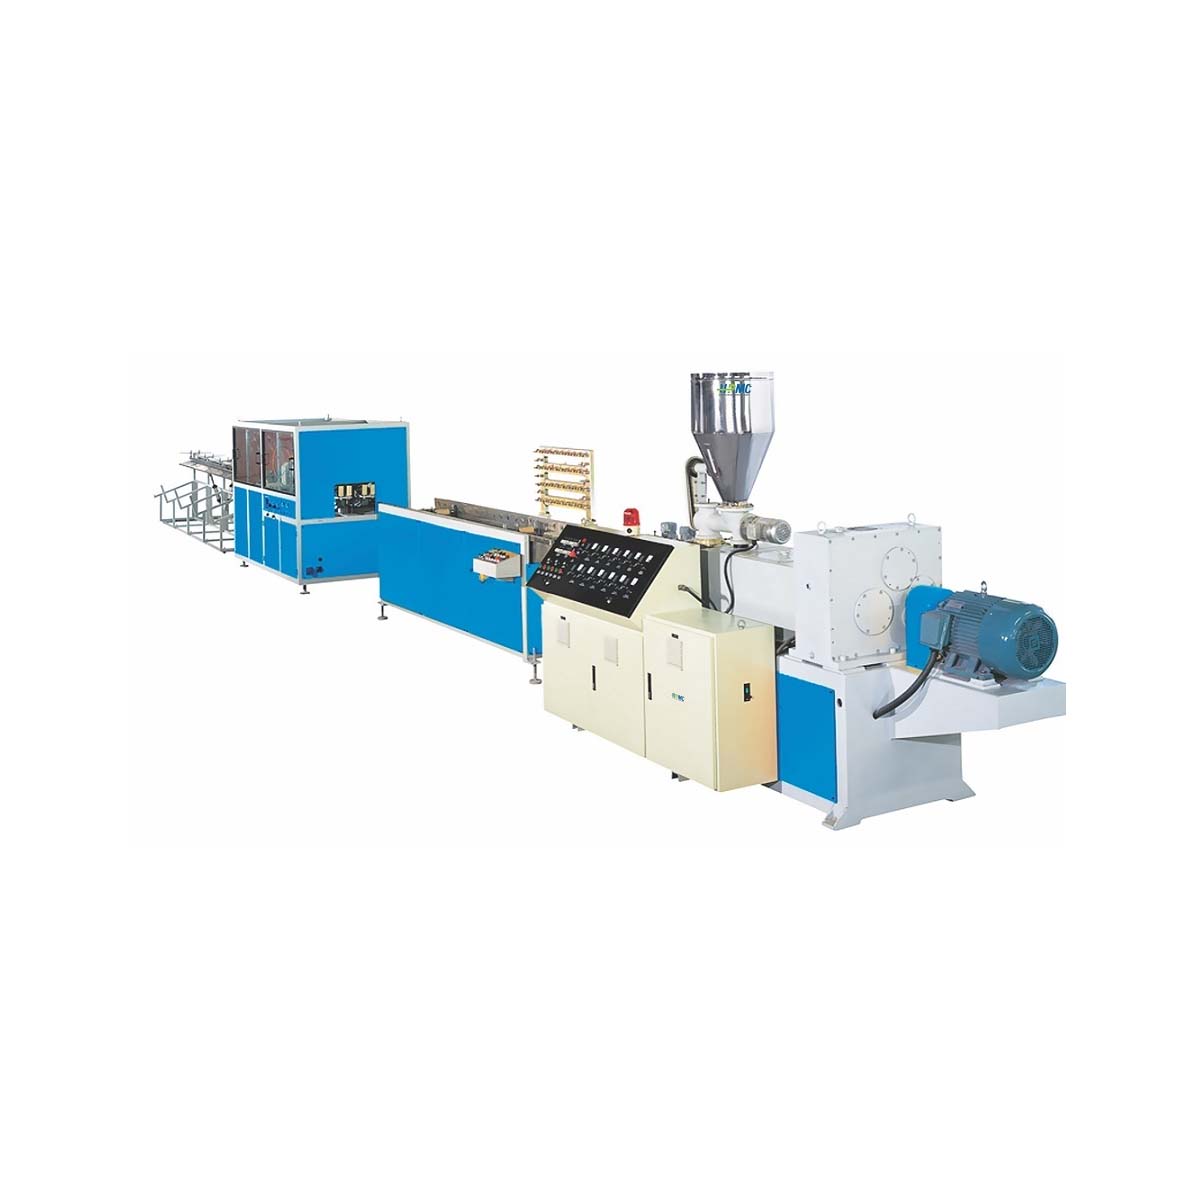 CPVC Pipe Plant Manufacturers, Suppliers and Exporters in Delhi